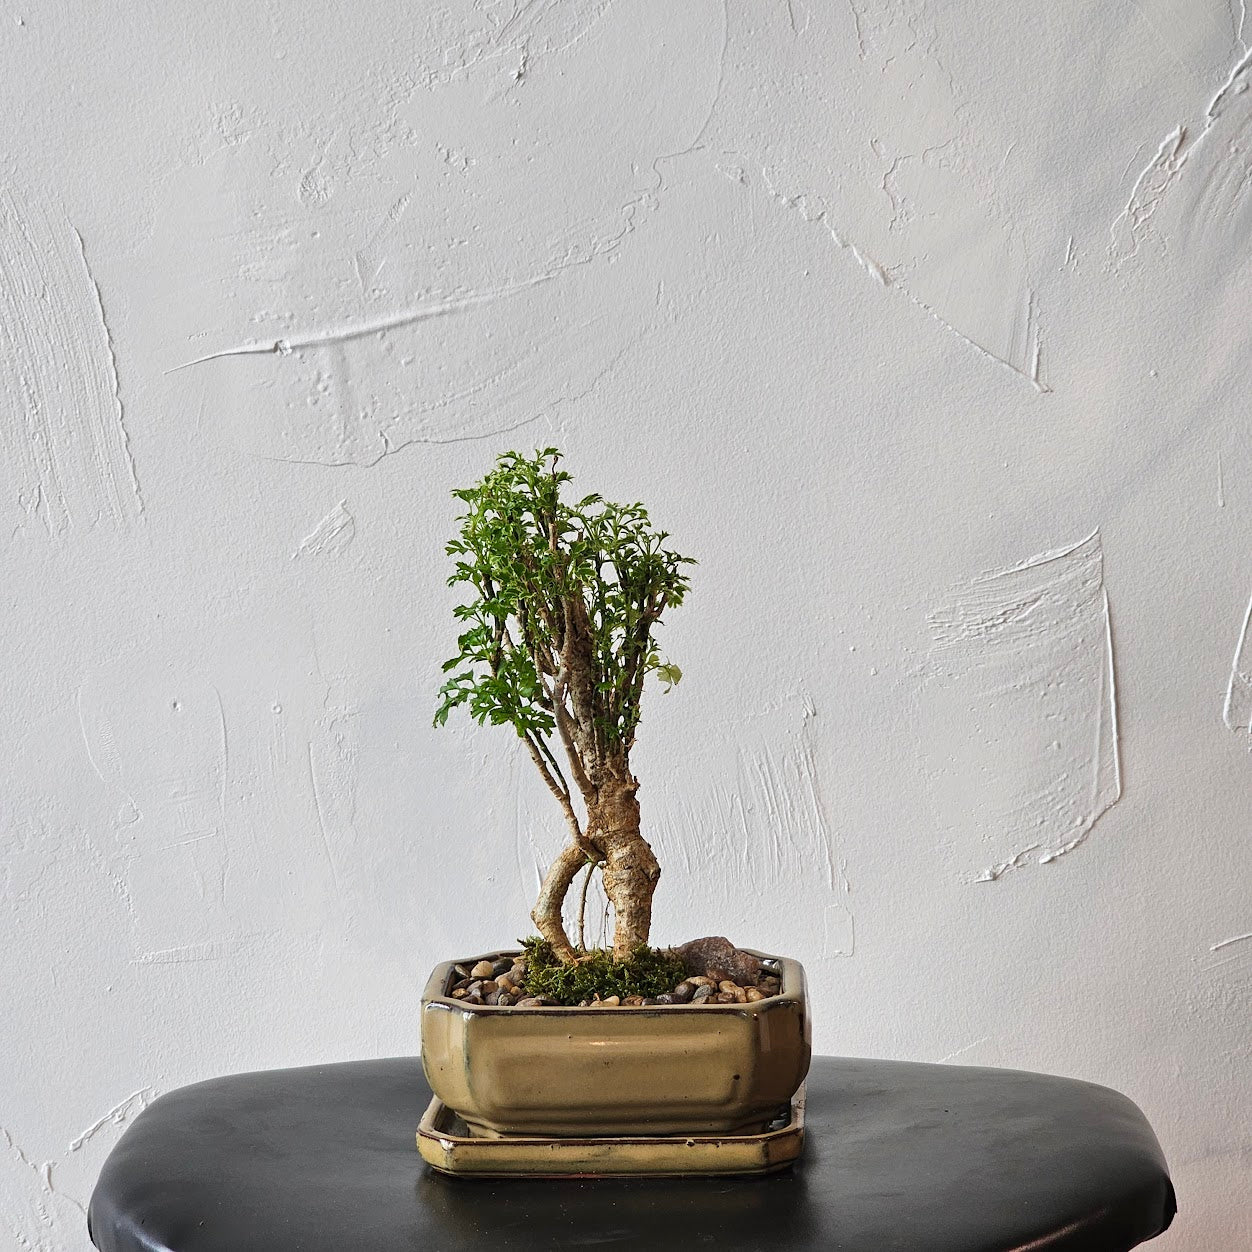 Snowflake Aralia Bonsai (Polyscias fruticosa) in a 6 inch pot. Indoor plant for sale by Promise Supply for delivery and pickup in Toronto